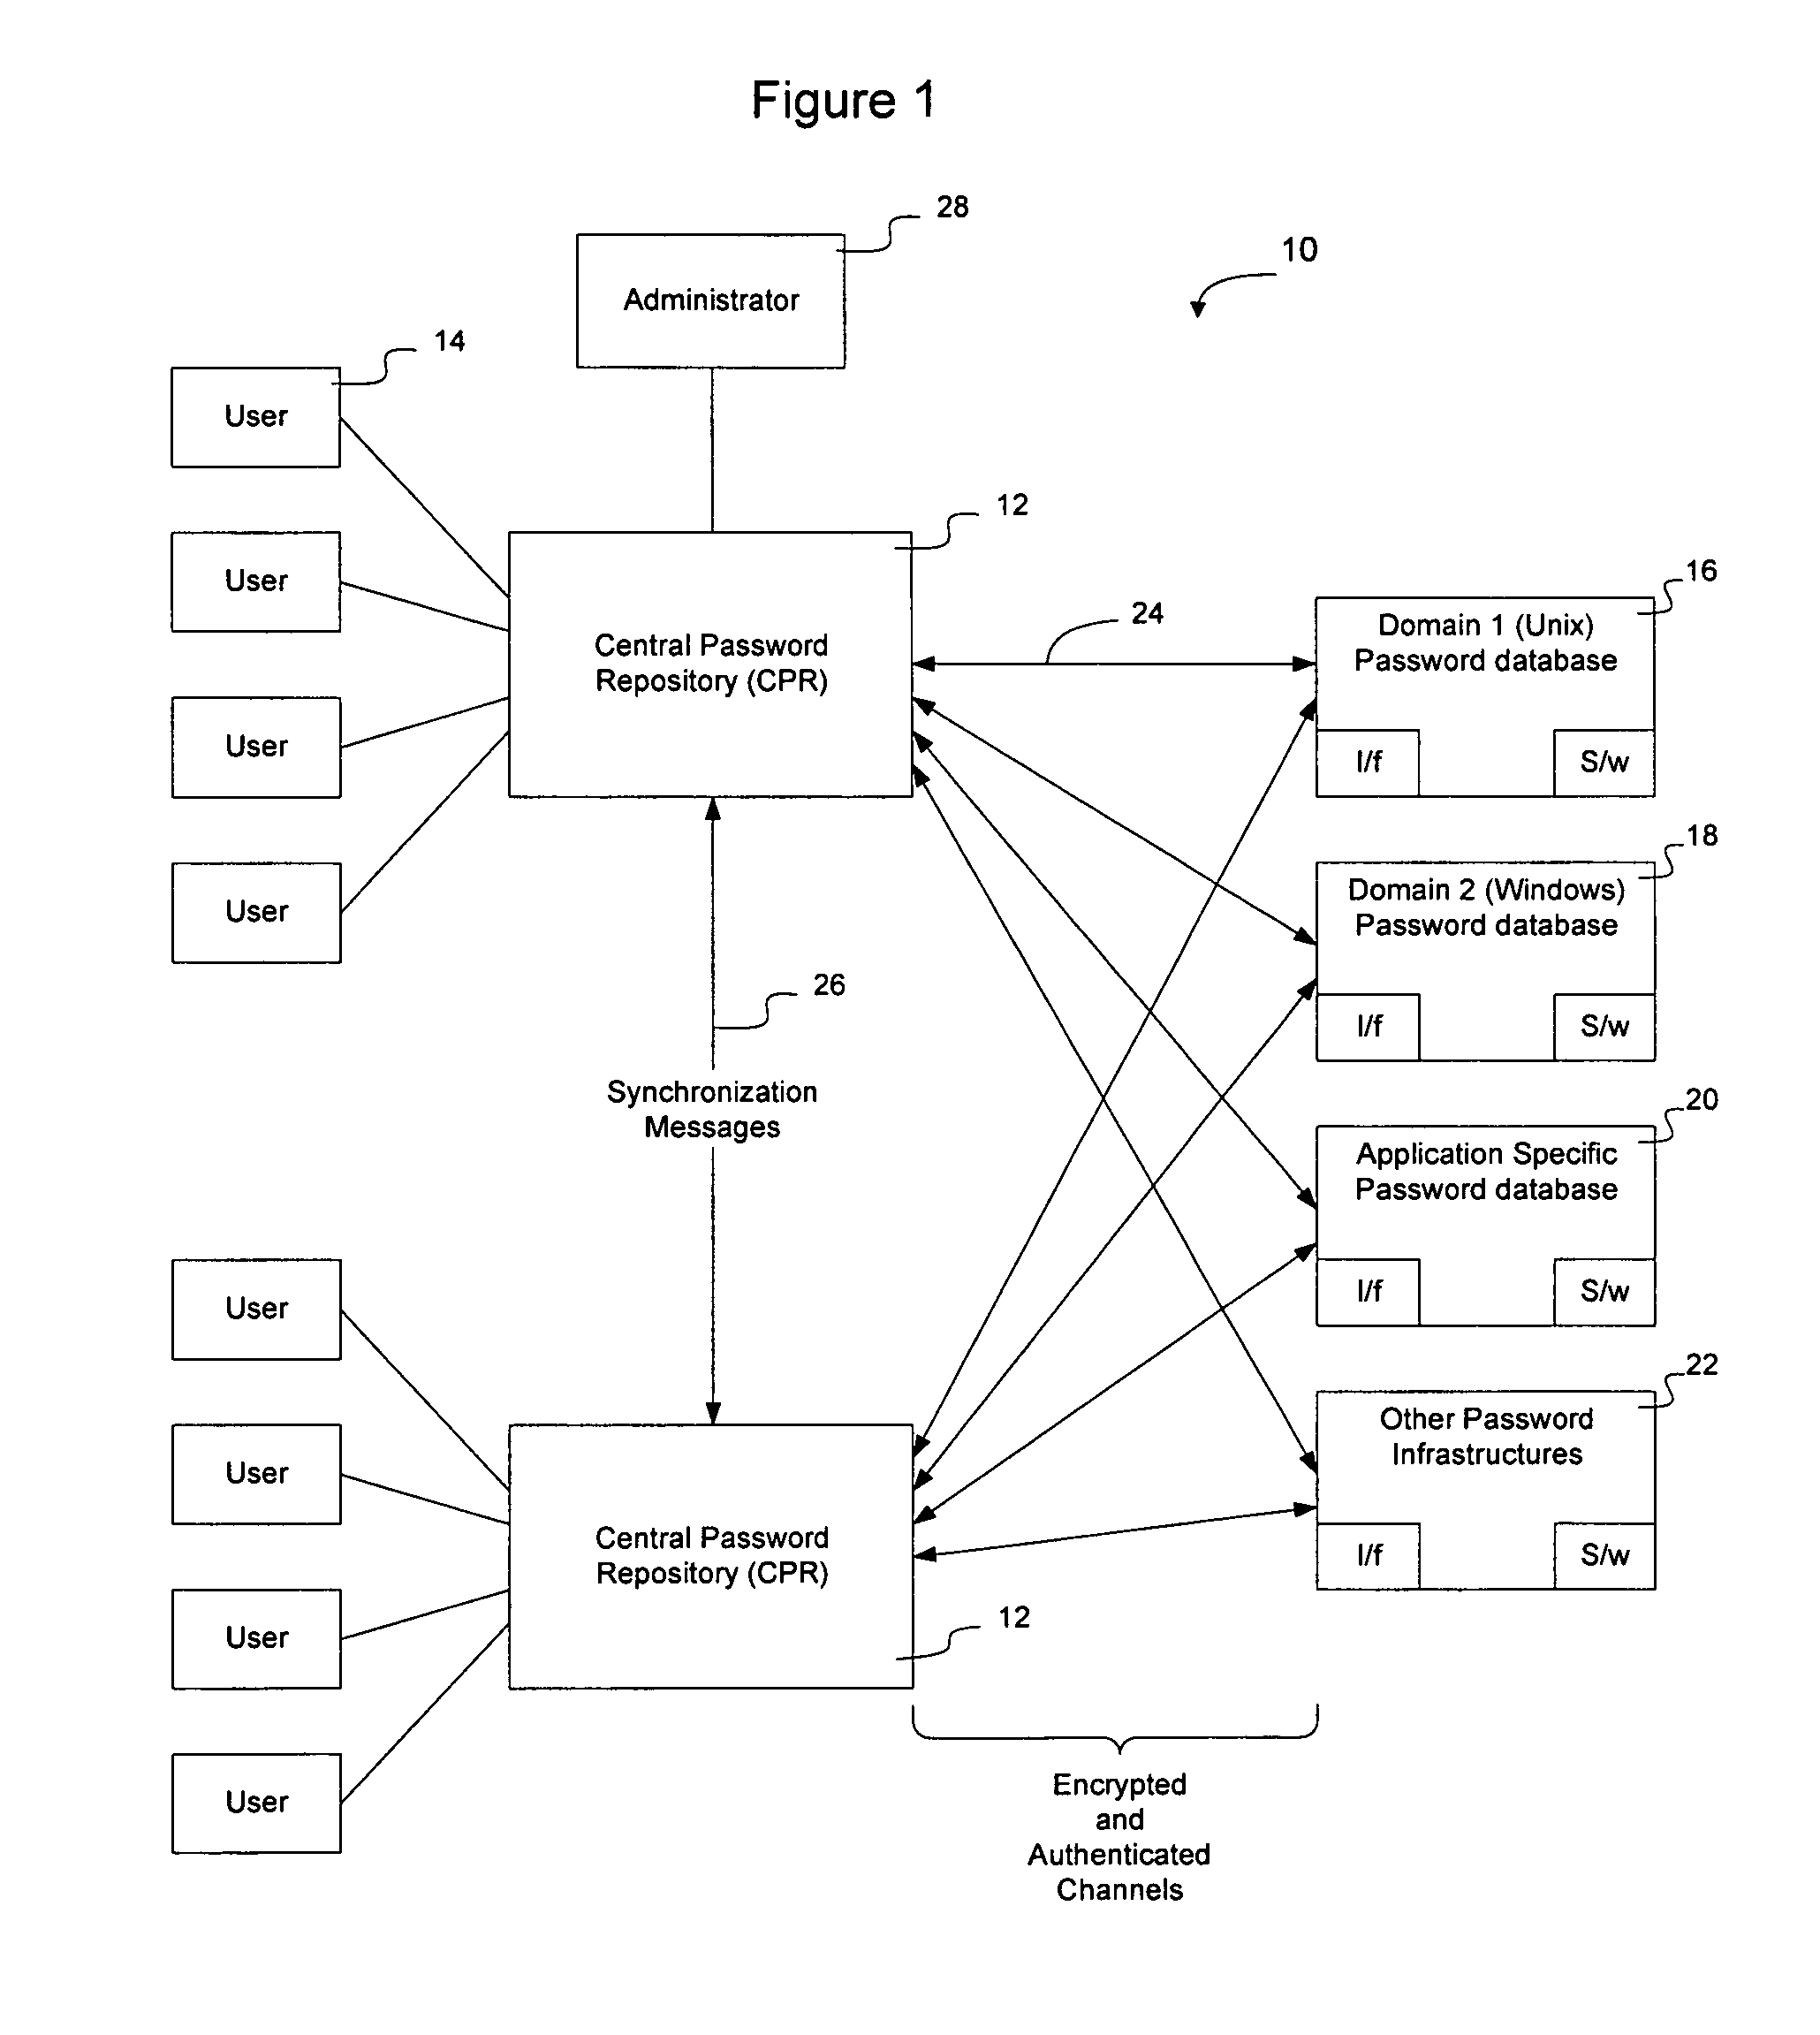 Method and apparatus for securely synchronizing password systems